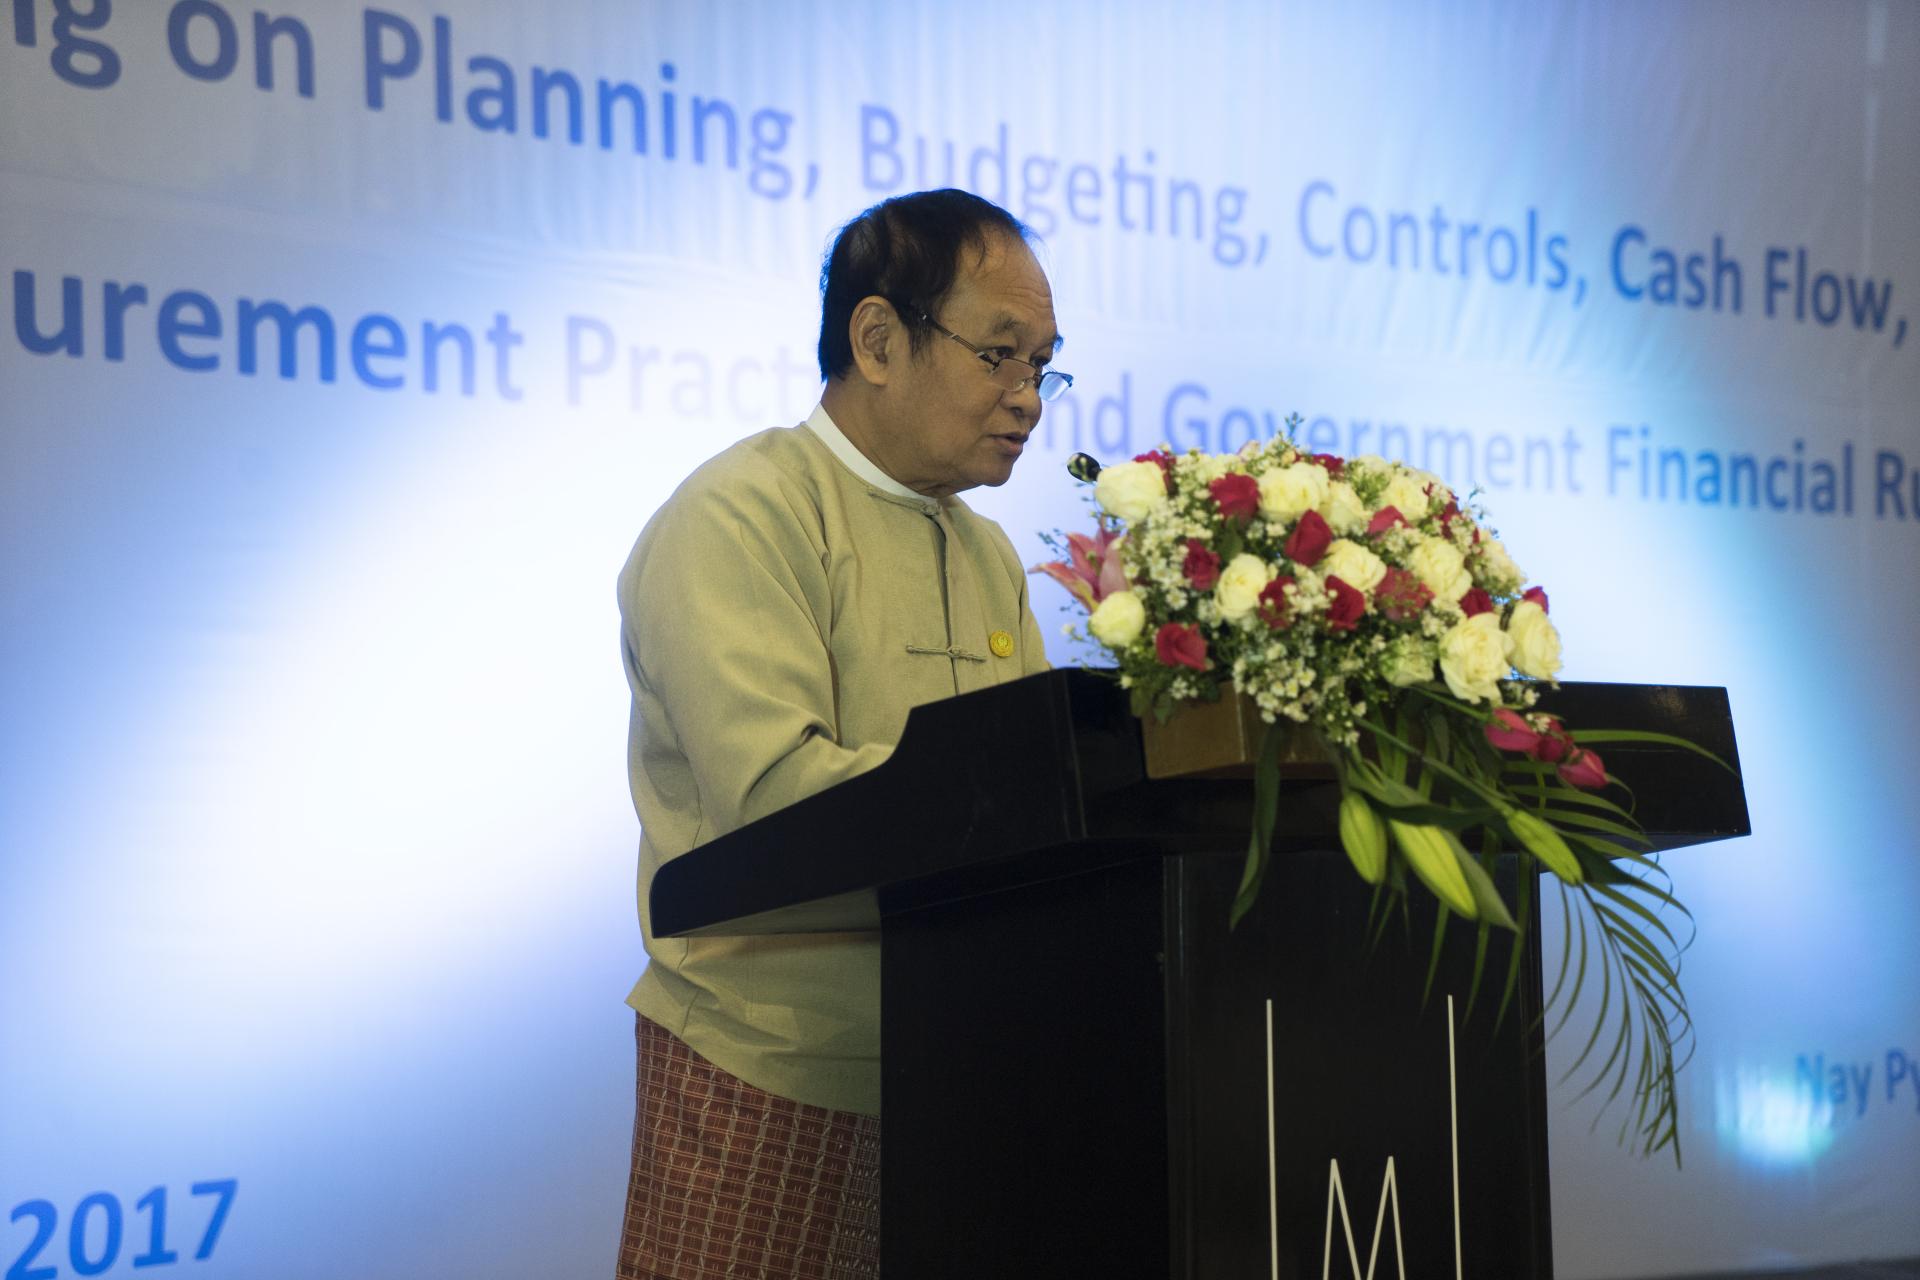 Union Minister for Health and Sports H.E. Dr Myint Htwe delivers the opening speech for the third batch of training on ‘Planning, Budgeting, Controls, Cash Flow, Good Procurement Practices and Government Financial Rules’, Nay Pyi Taw, 6 November 2017.